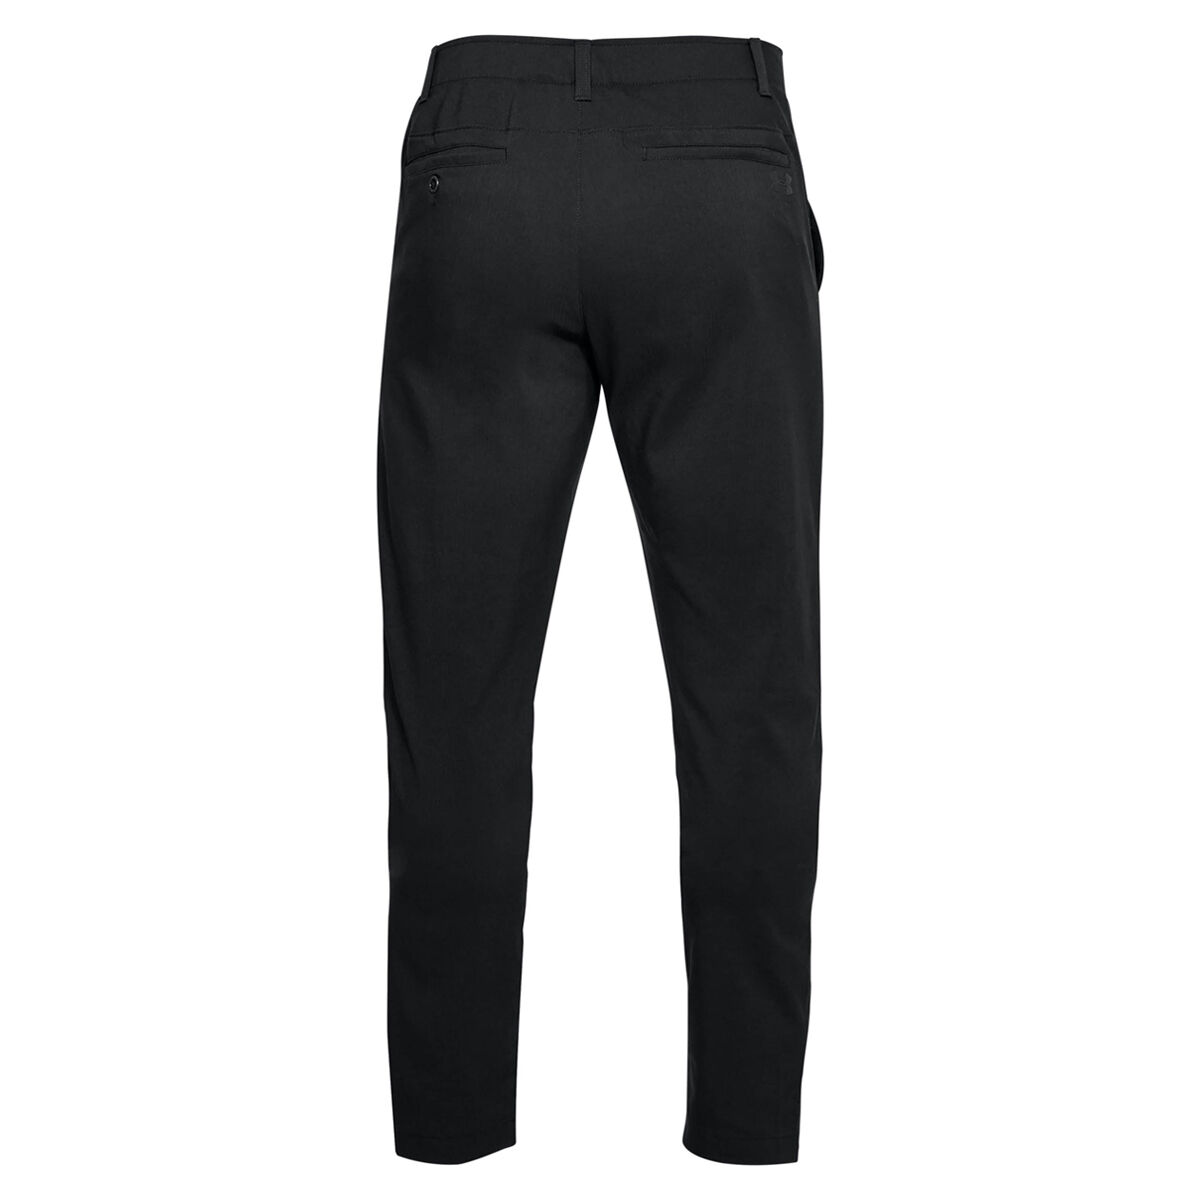 Buy Black Active Sports Golf Trousers from the Next UK online shop